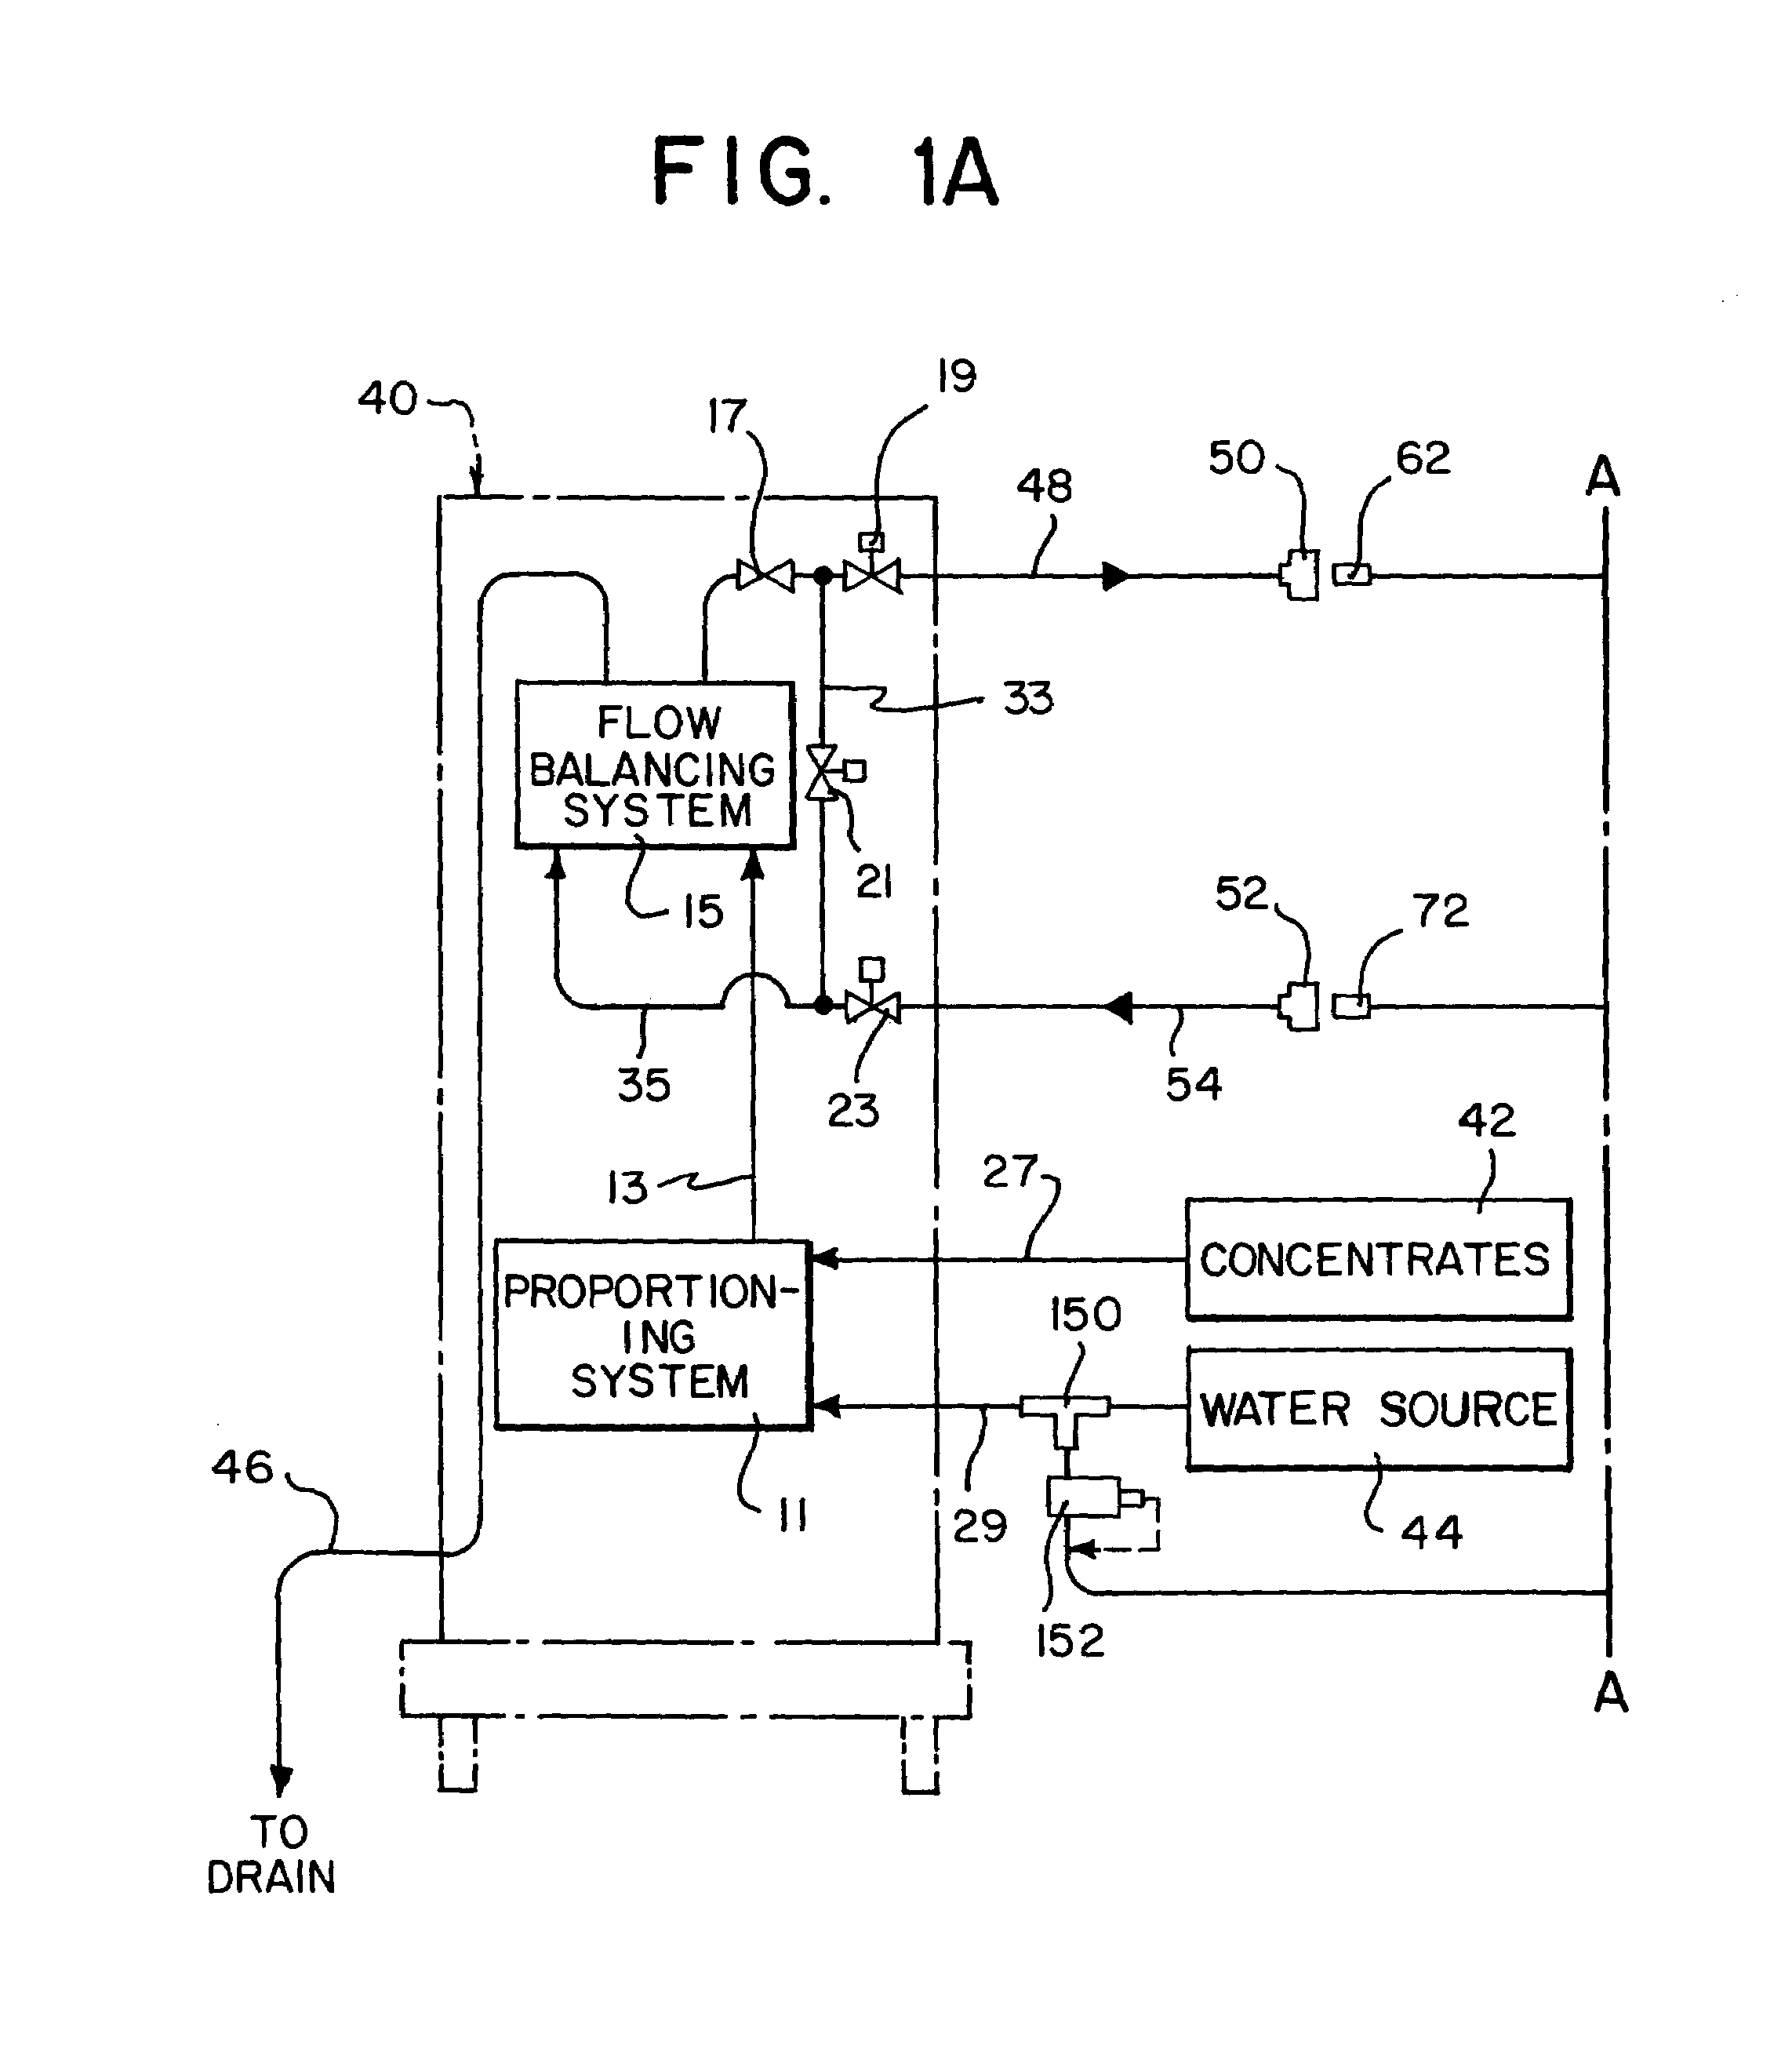 Method and apparatus for generating a sterile infusion fluid